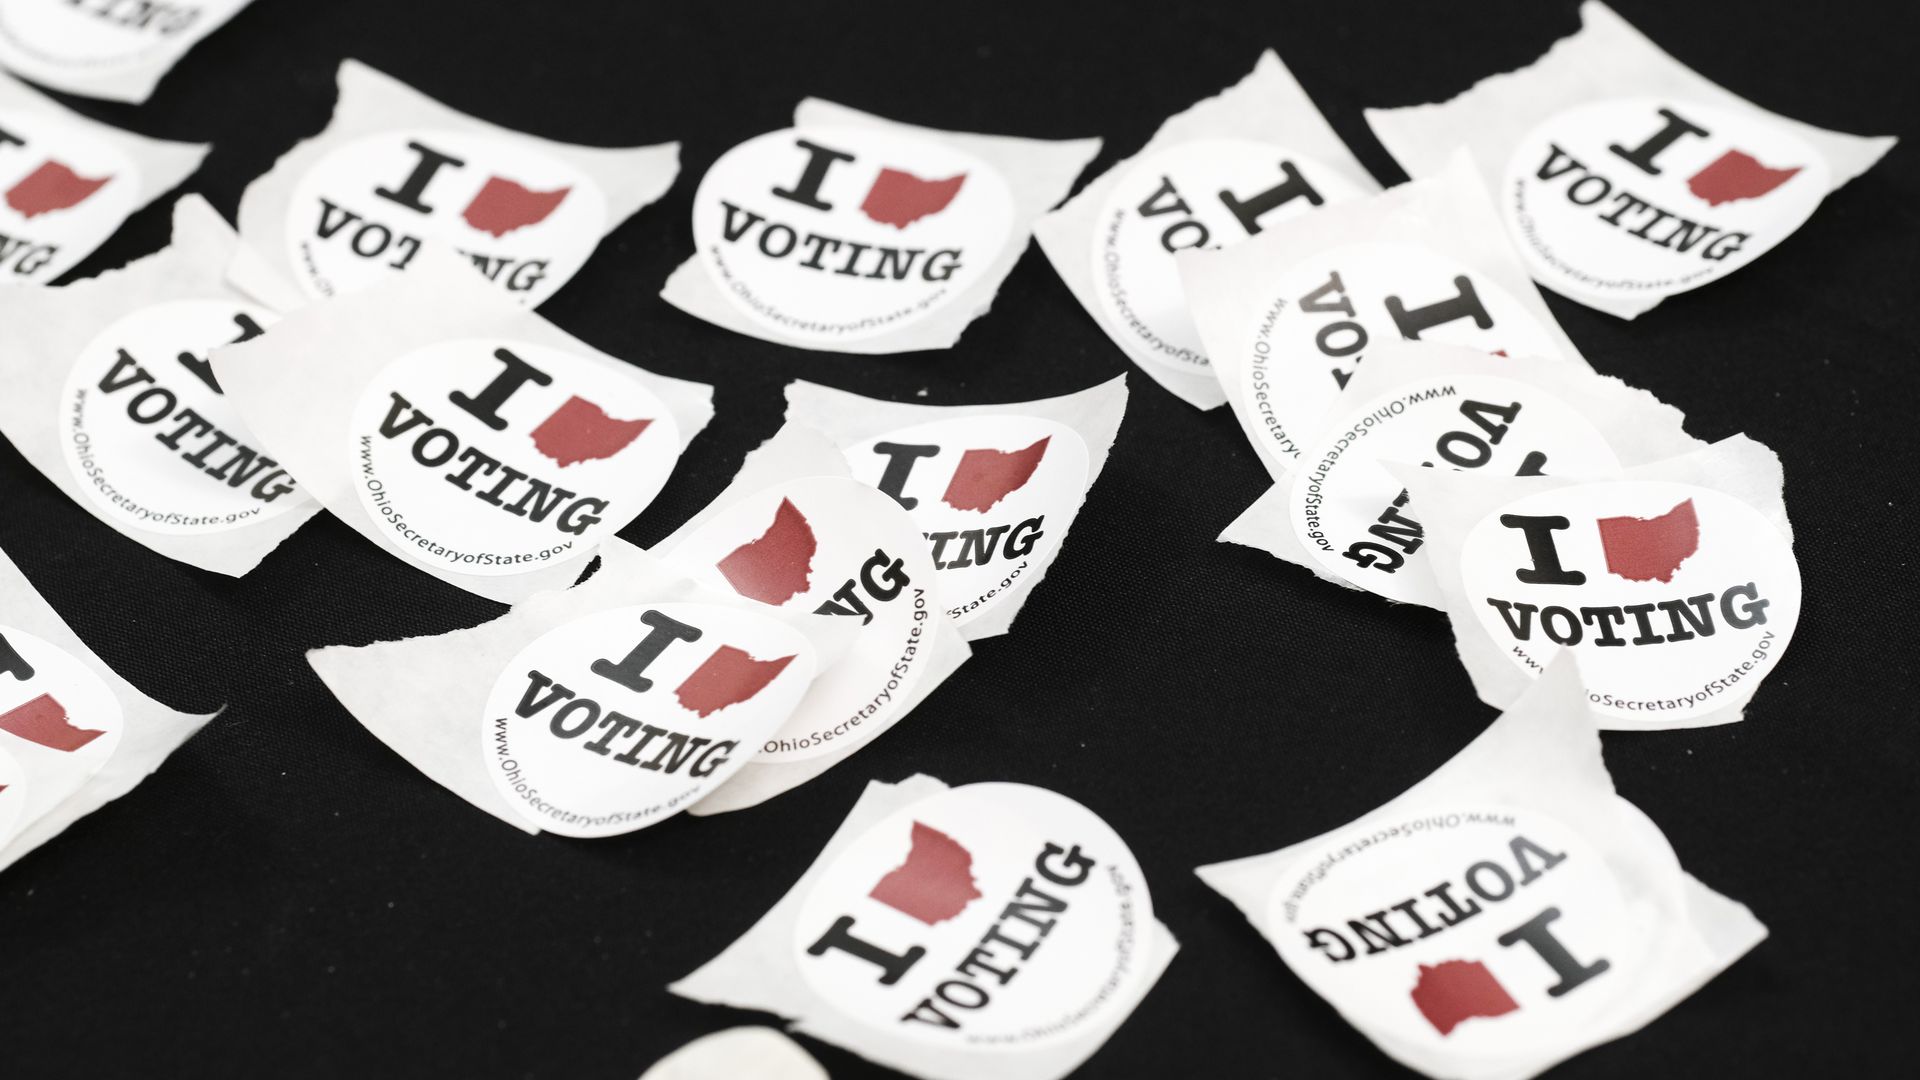 A collection of Ohio "I Voted" stickers.